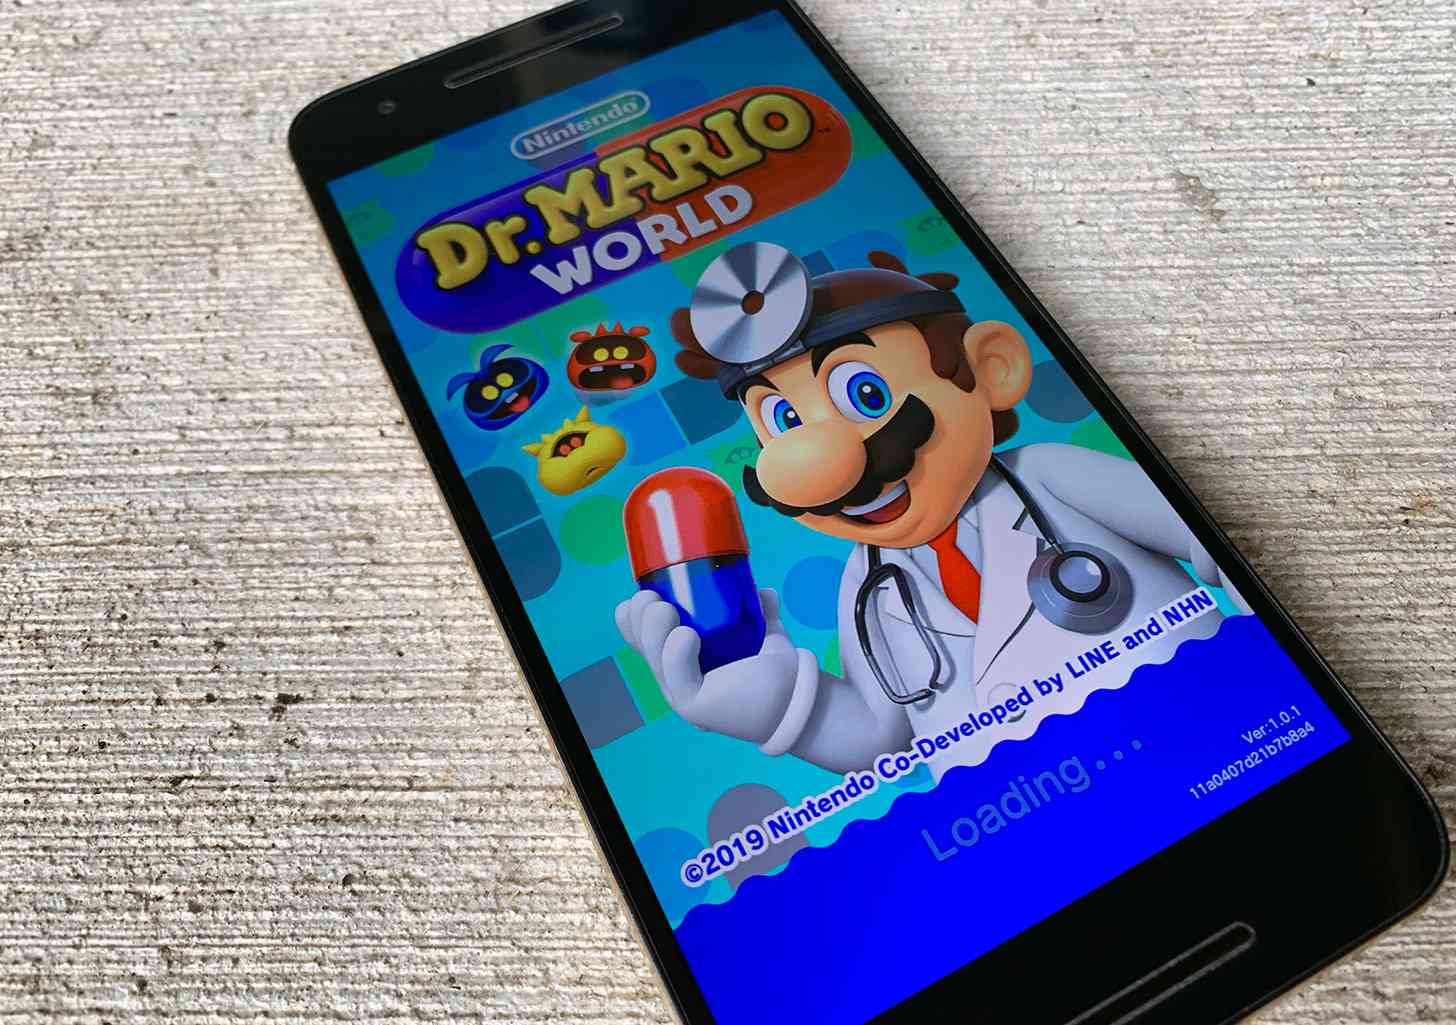 Dr. Mario World Android app